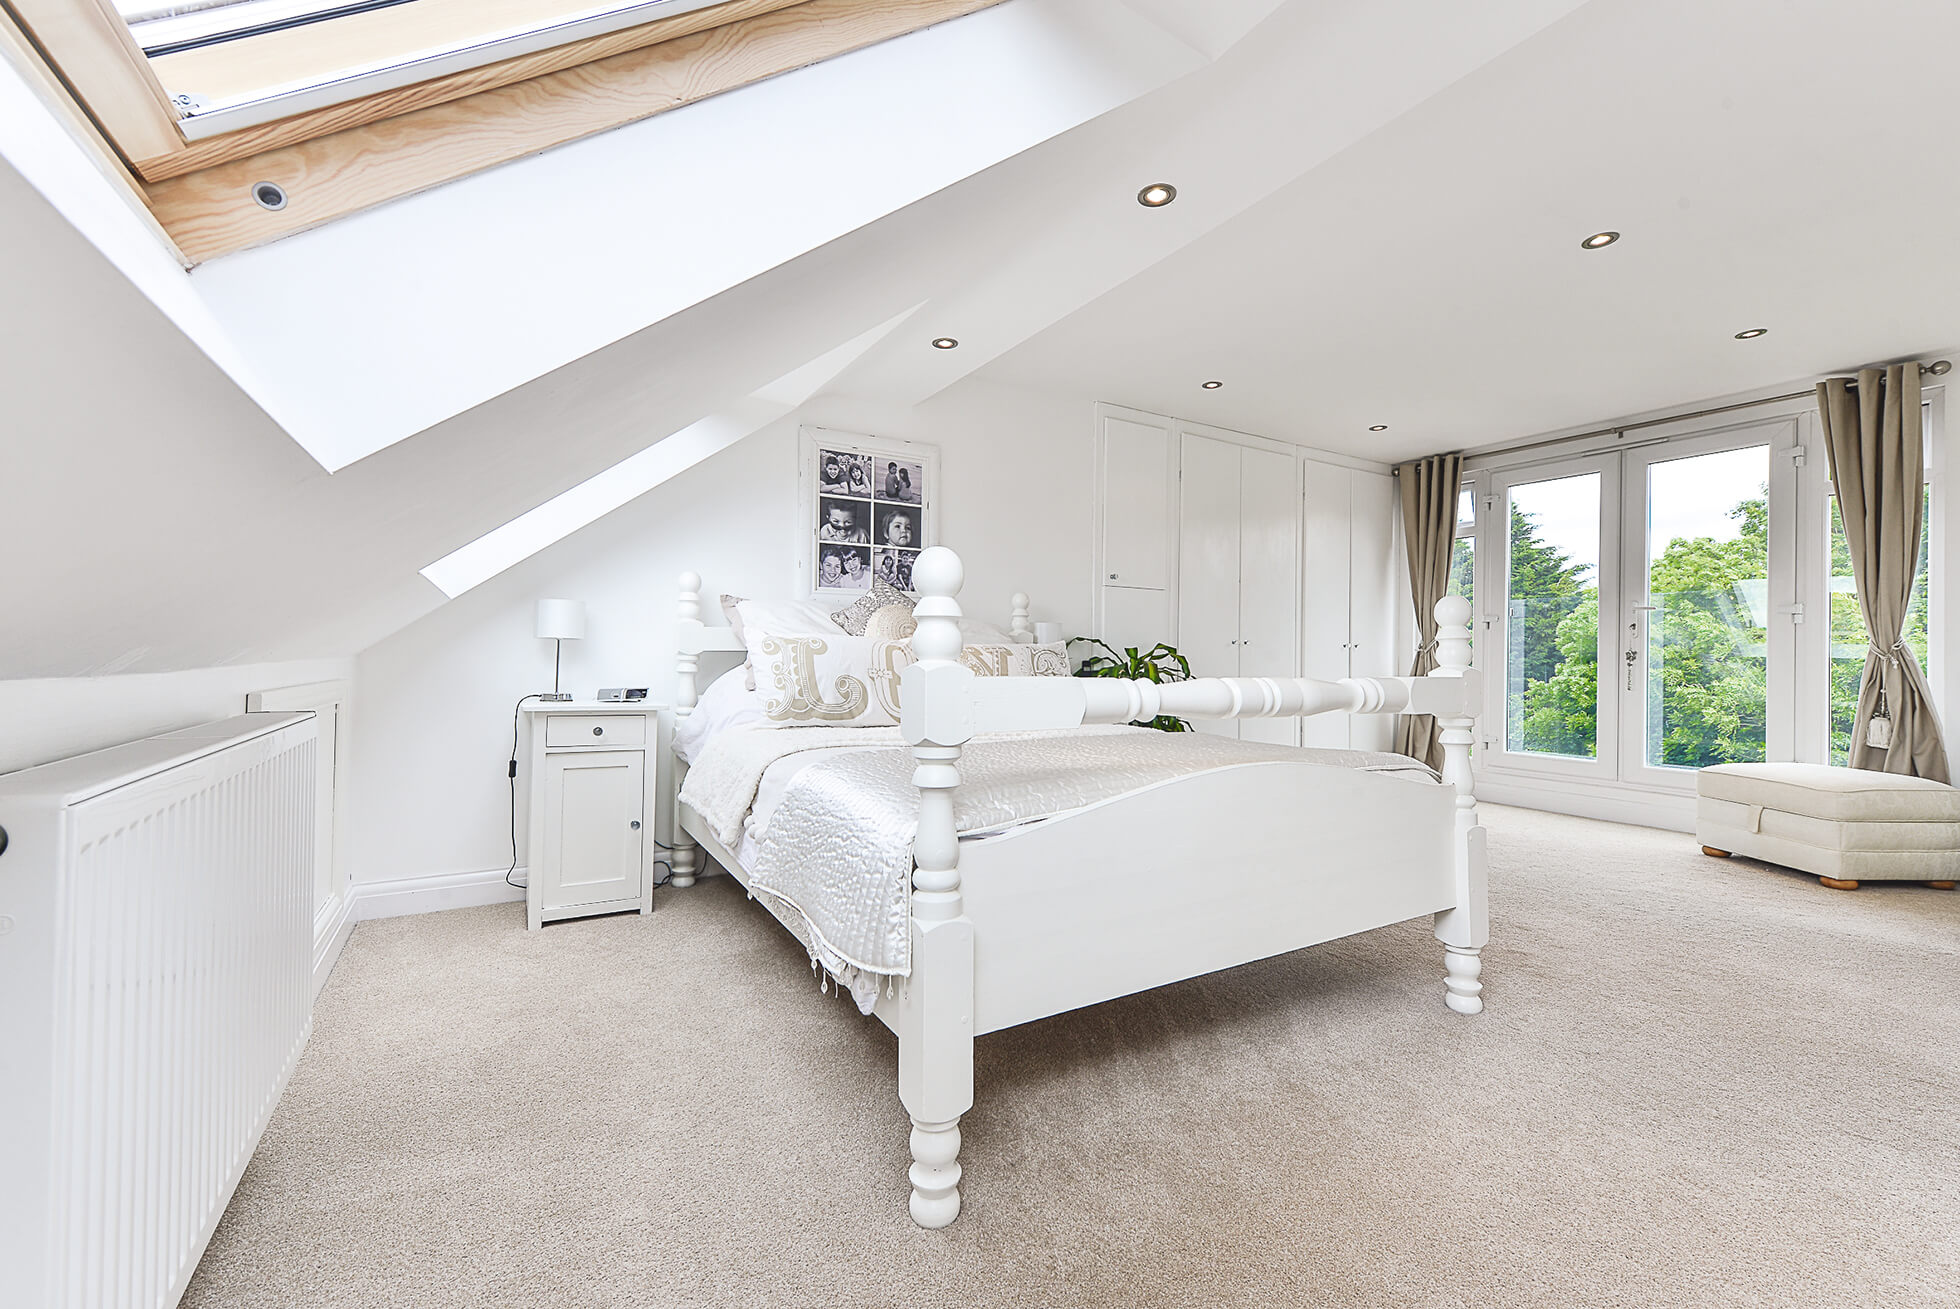 Do you have a question about converting your Loft in Old Hatfield? Here are the most popular questions asked by our clients.